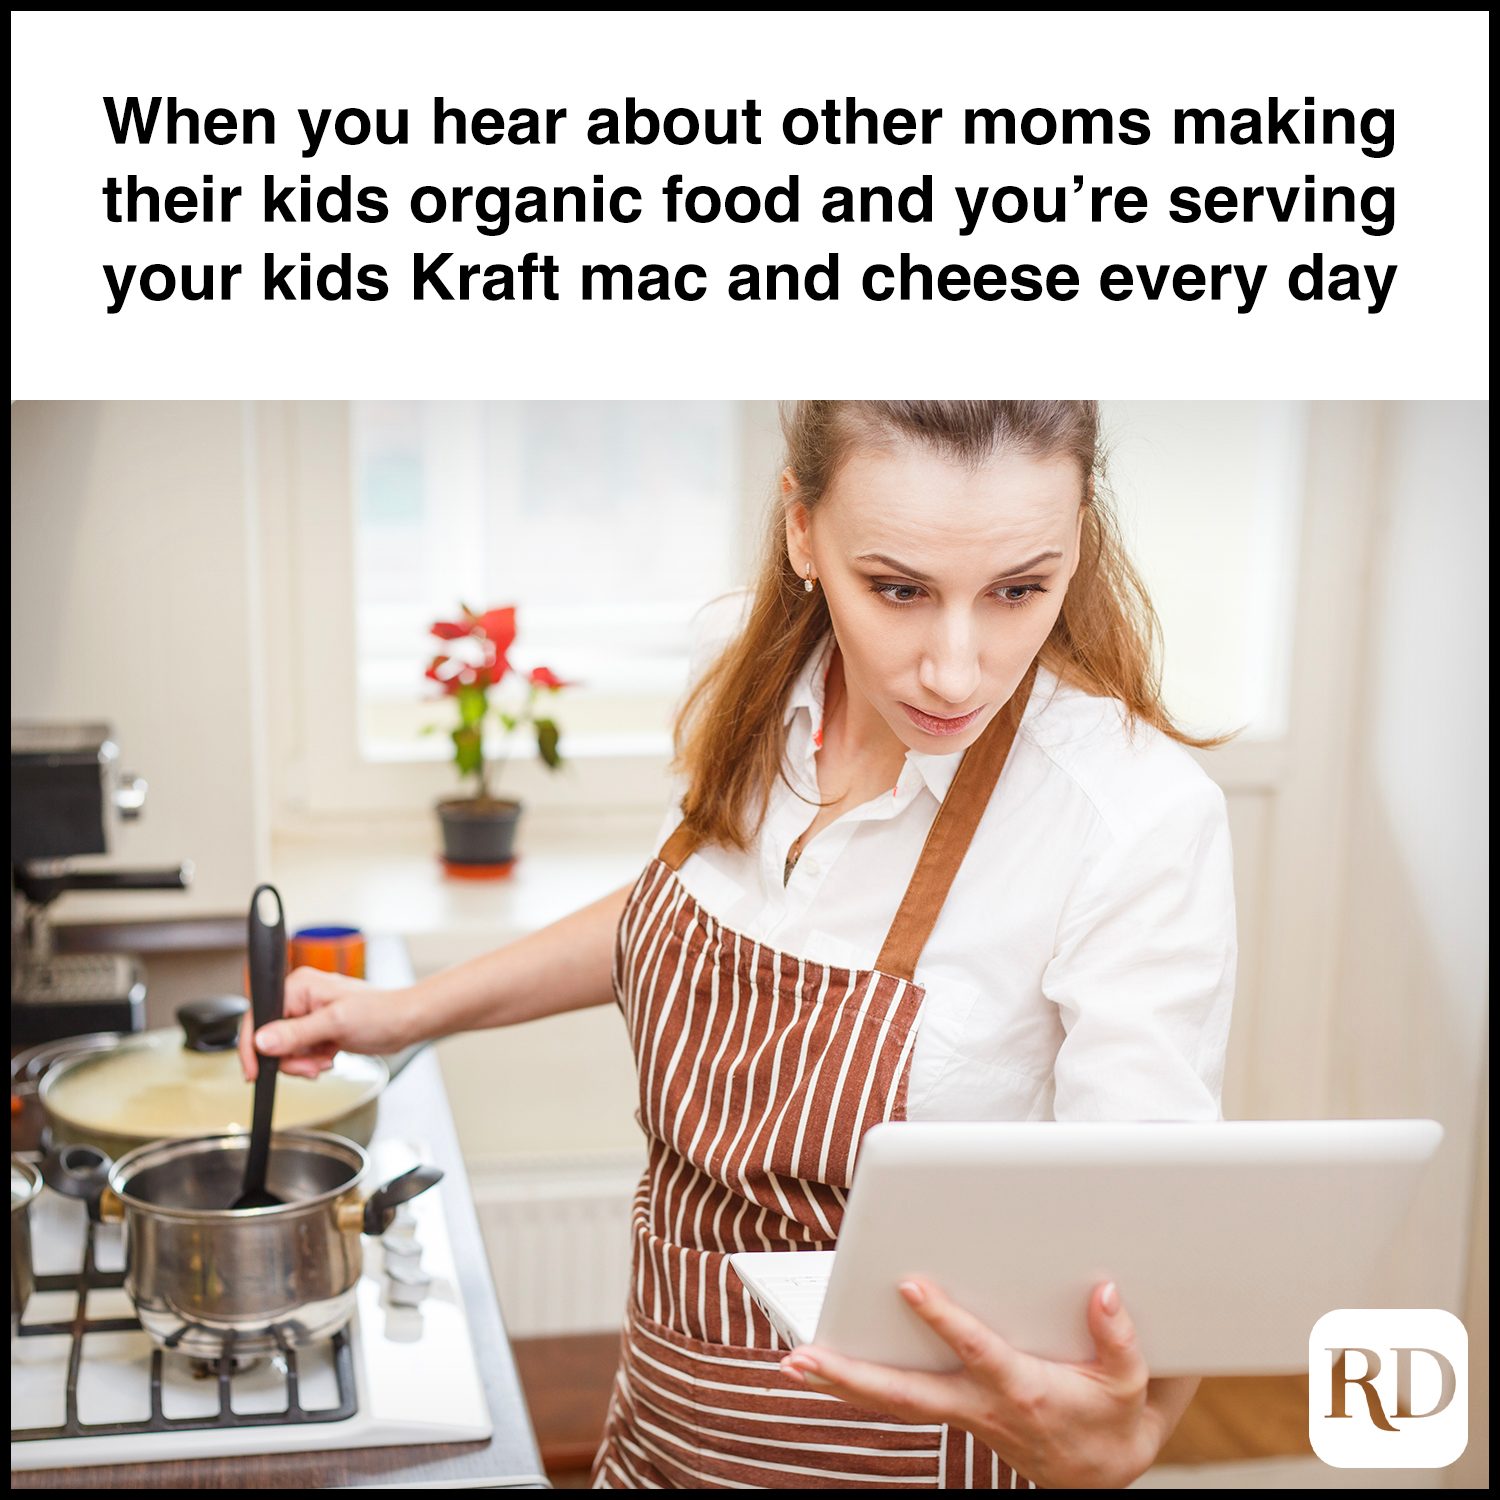 When you hear about other moms making their kids organic food and you're serving your kids Kraft mac and cheese every day